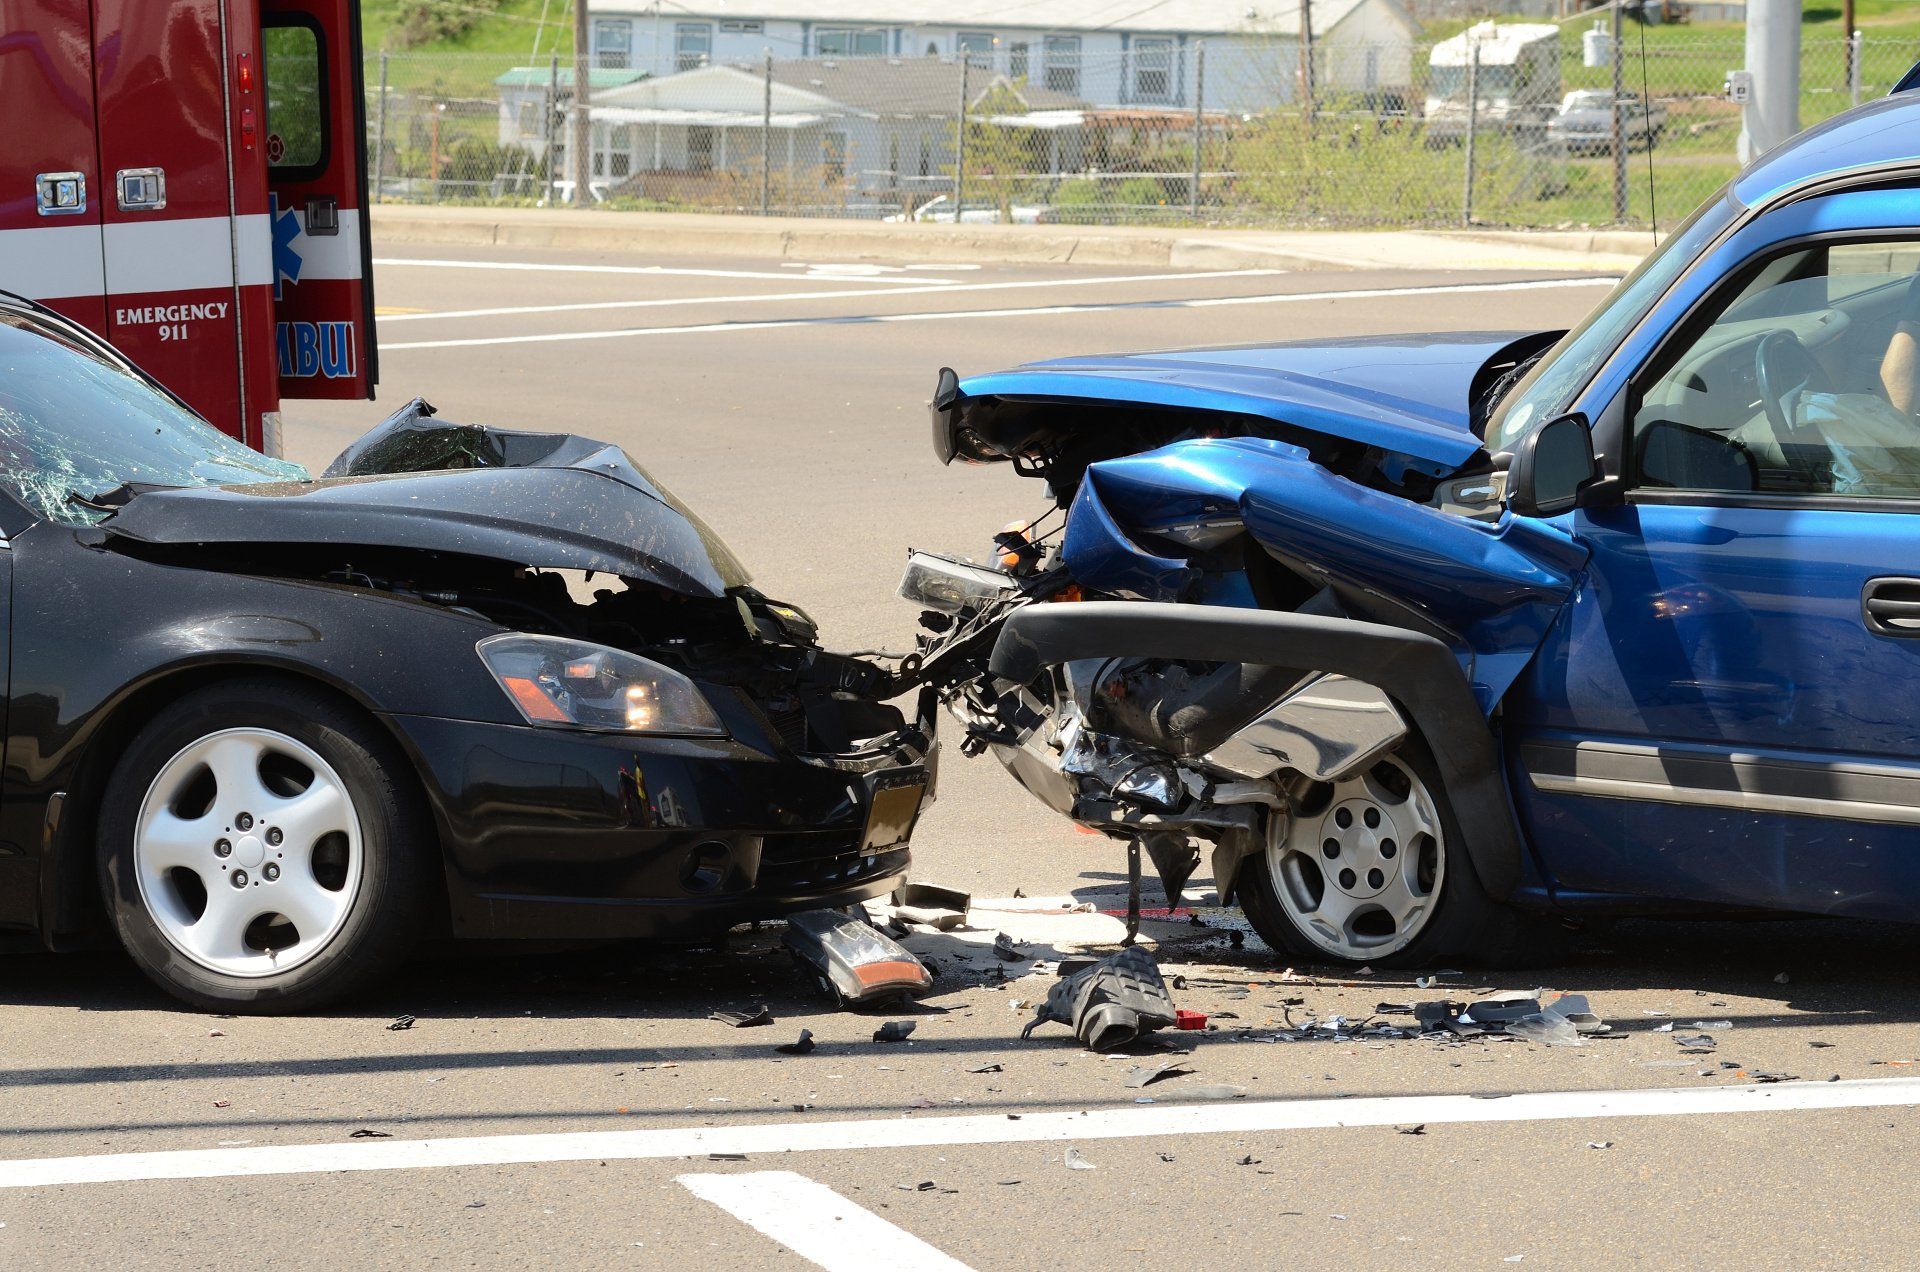 Common Types of Car Accidents and How Comparative Negligence Affects Fault